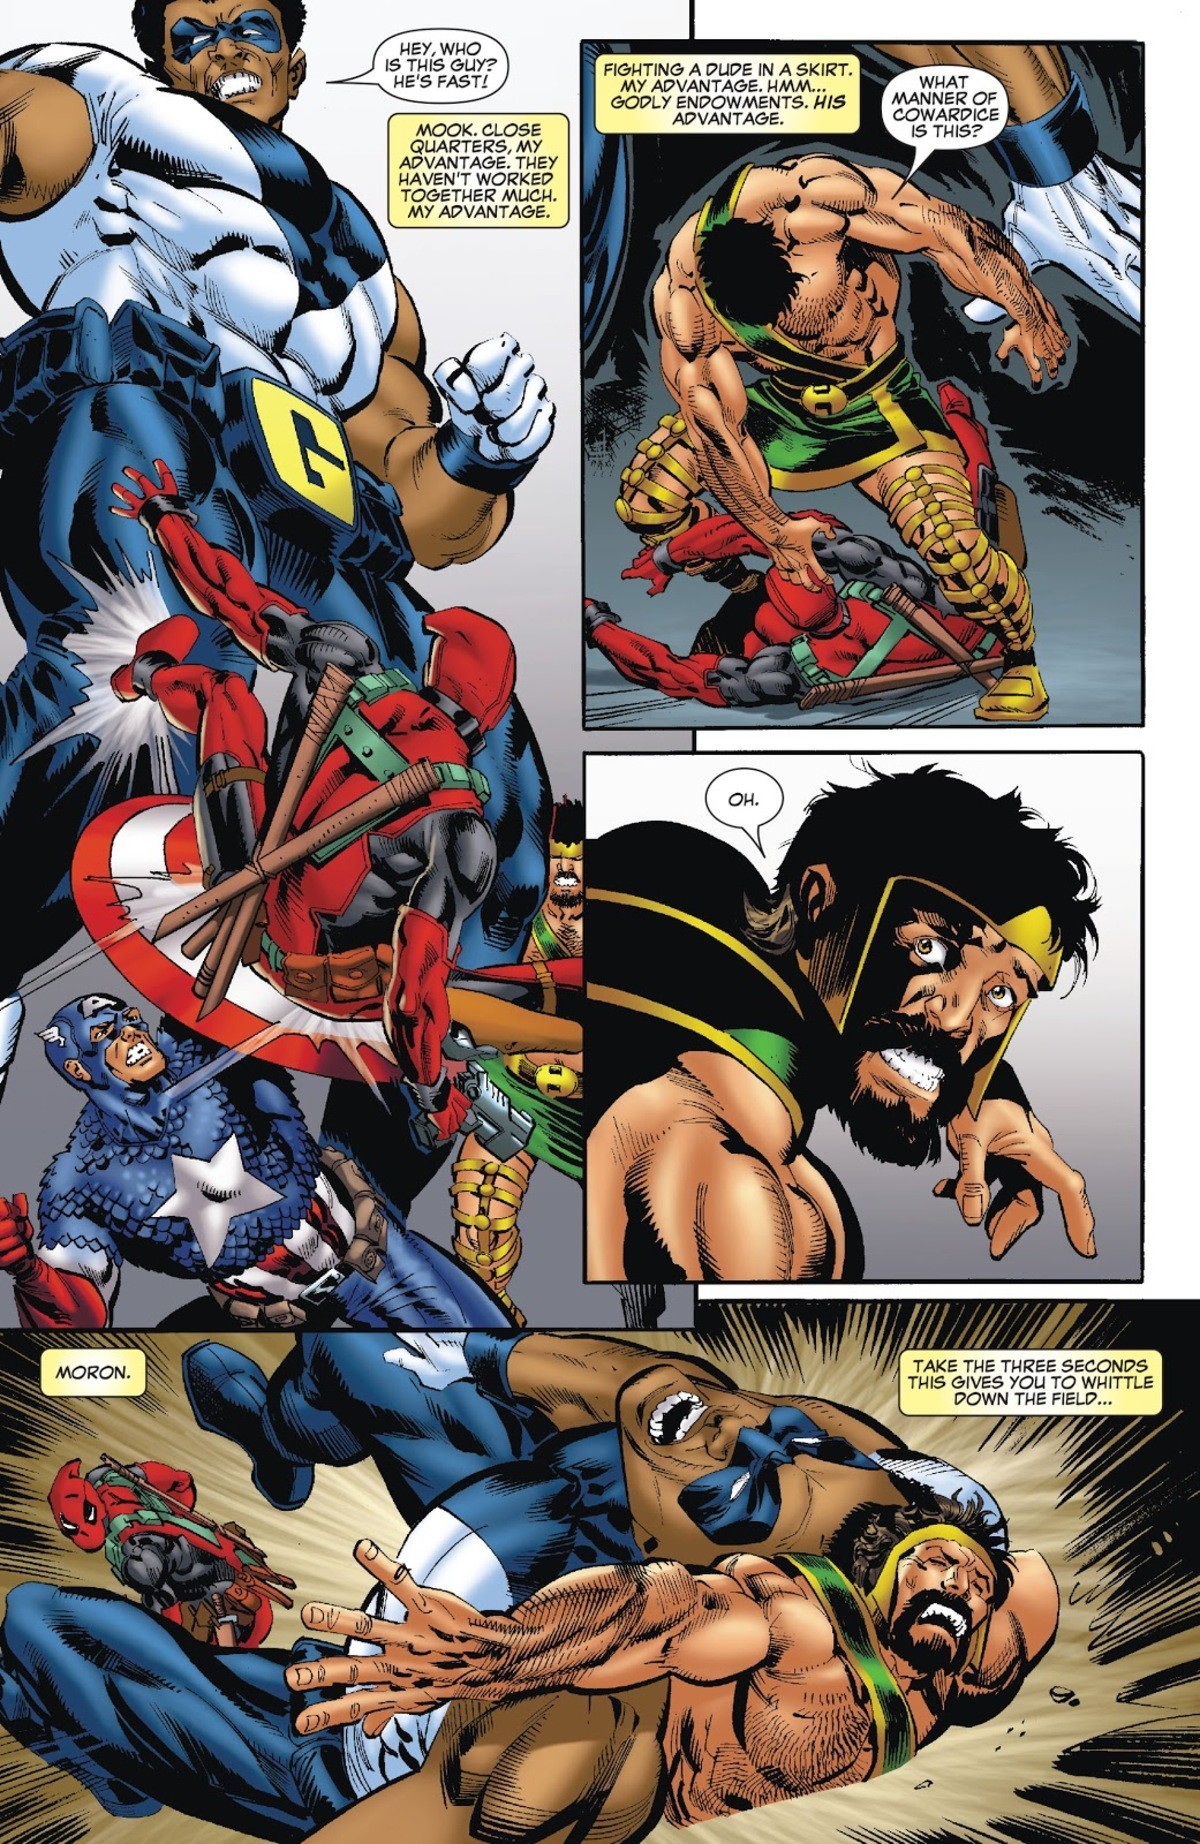 How to beat Deadpool. Source: .. Oh yeah, I remember this run. He and Cable had a major falling out when Cable had his &quot;I am from the future, so I know better and I'm going to fix everythi